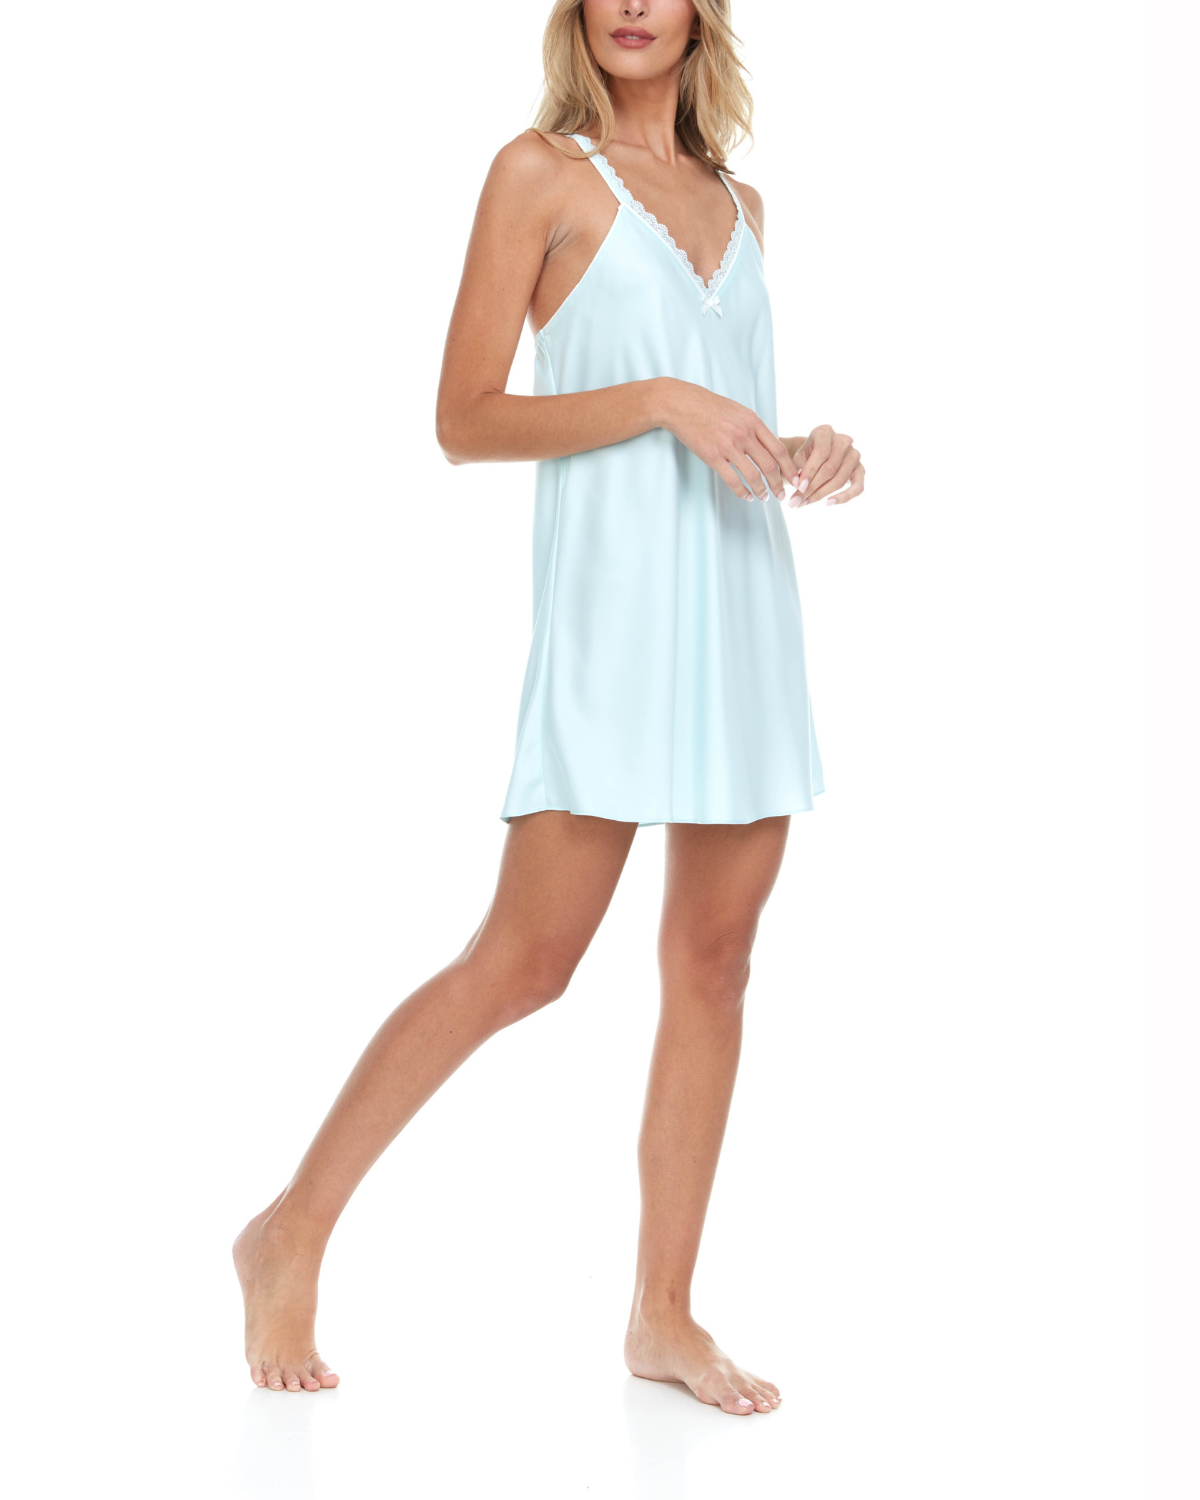 Flora Nikrooz Kenda Chemise (More colors available) - T90821